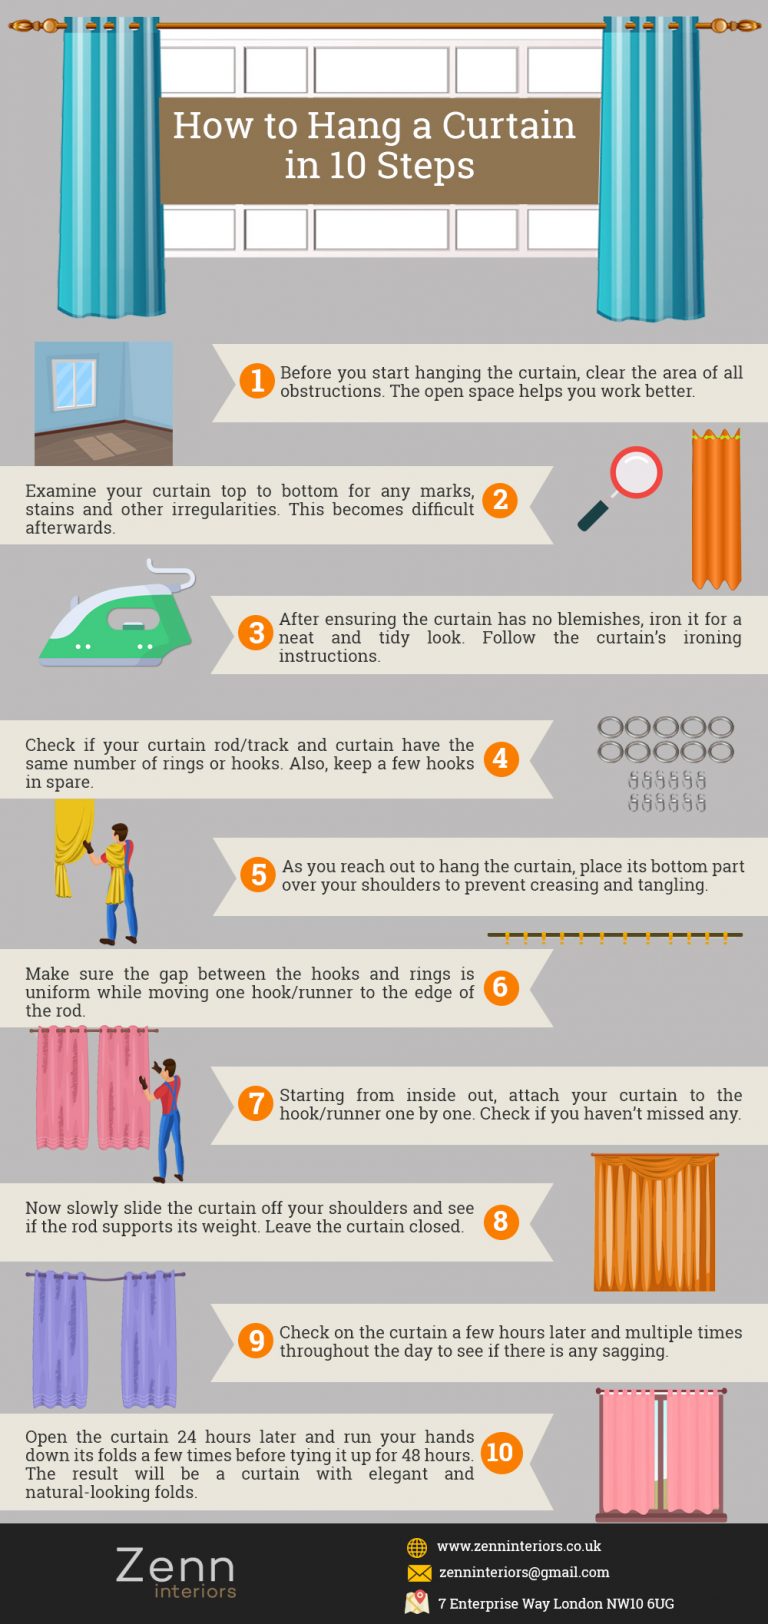 how-to-hang-a-curtain-in-10-steps-infographic-zenn-interiors